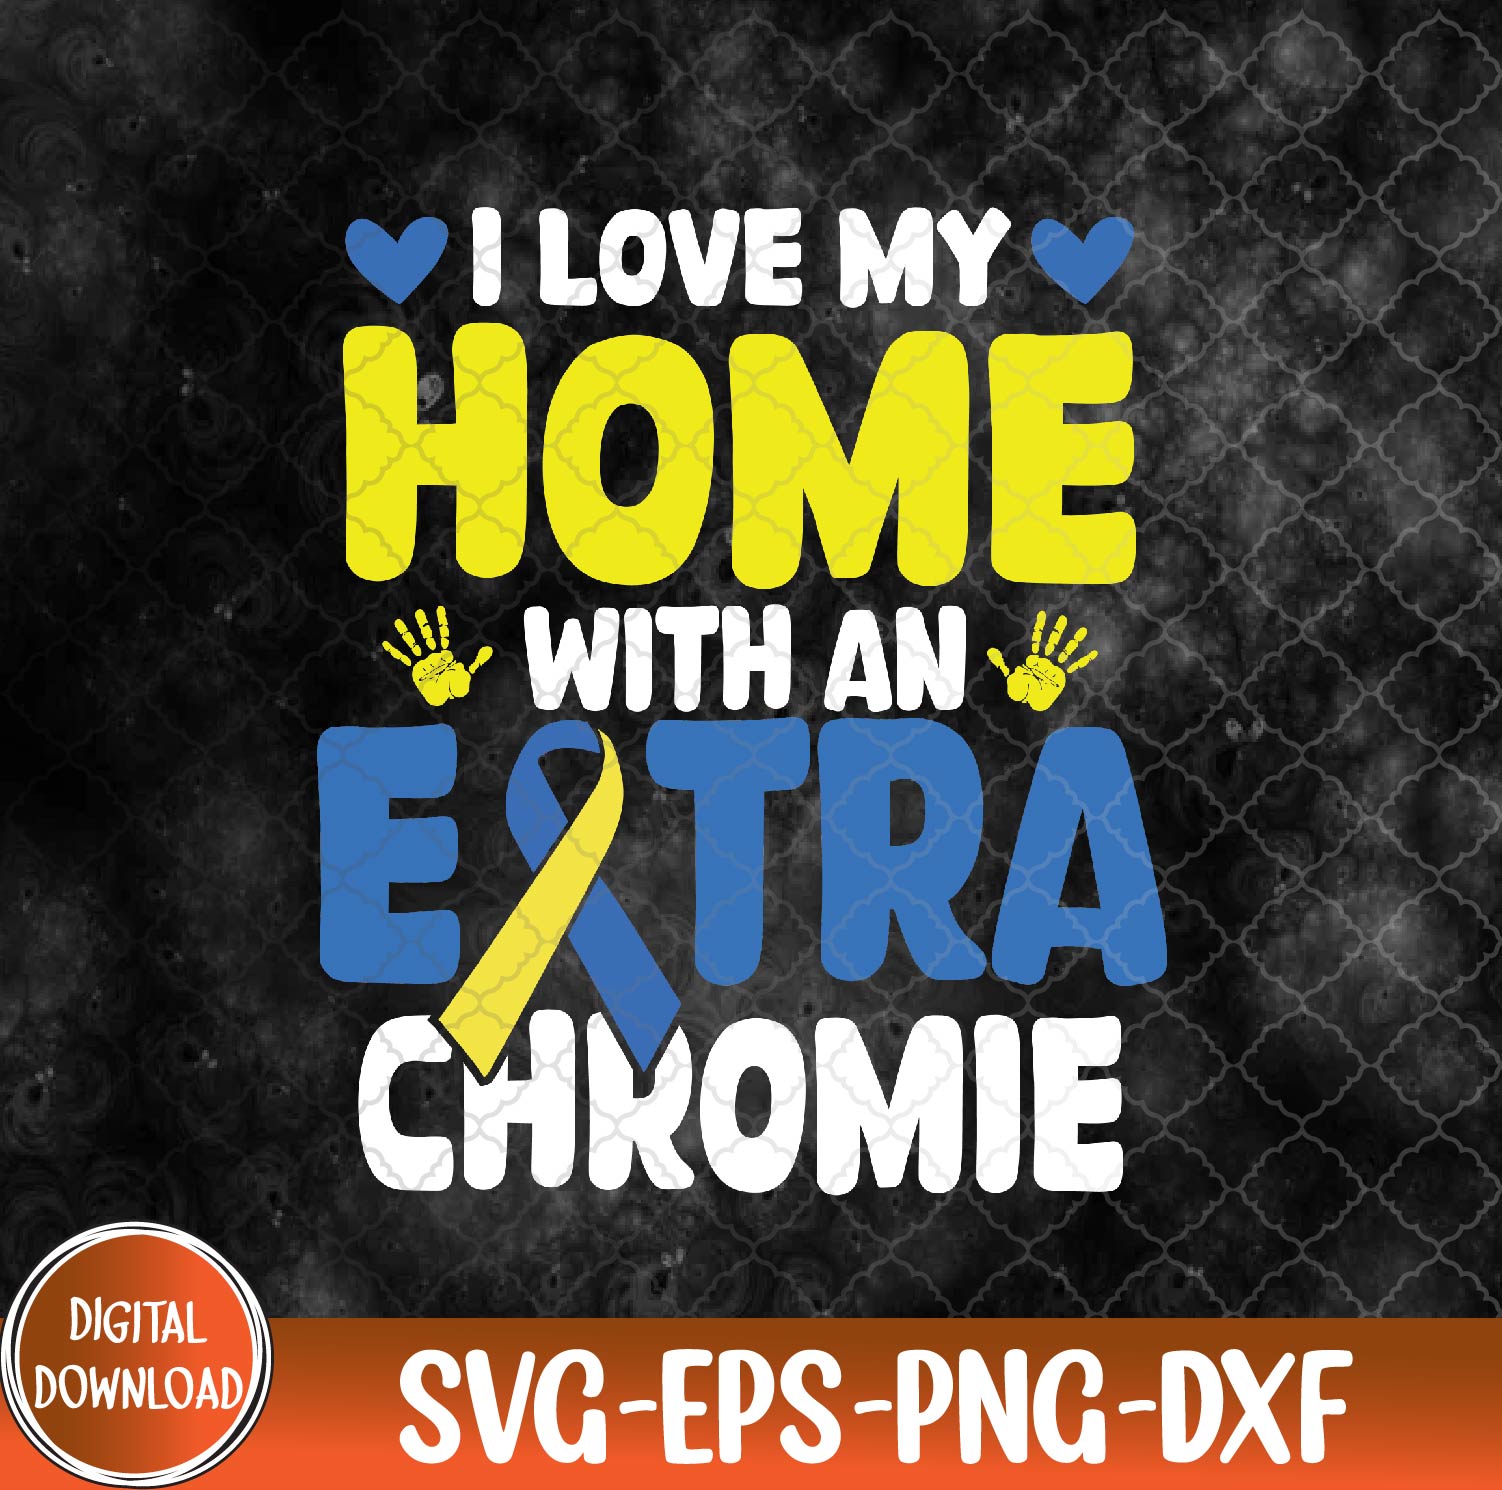 WTMNEW9file 09 31 Love My Homie With The Extra Chromie Down Syndrome Awareness Svg, Eps, Png, Dxf